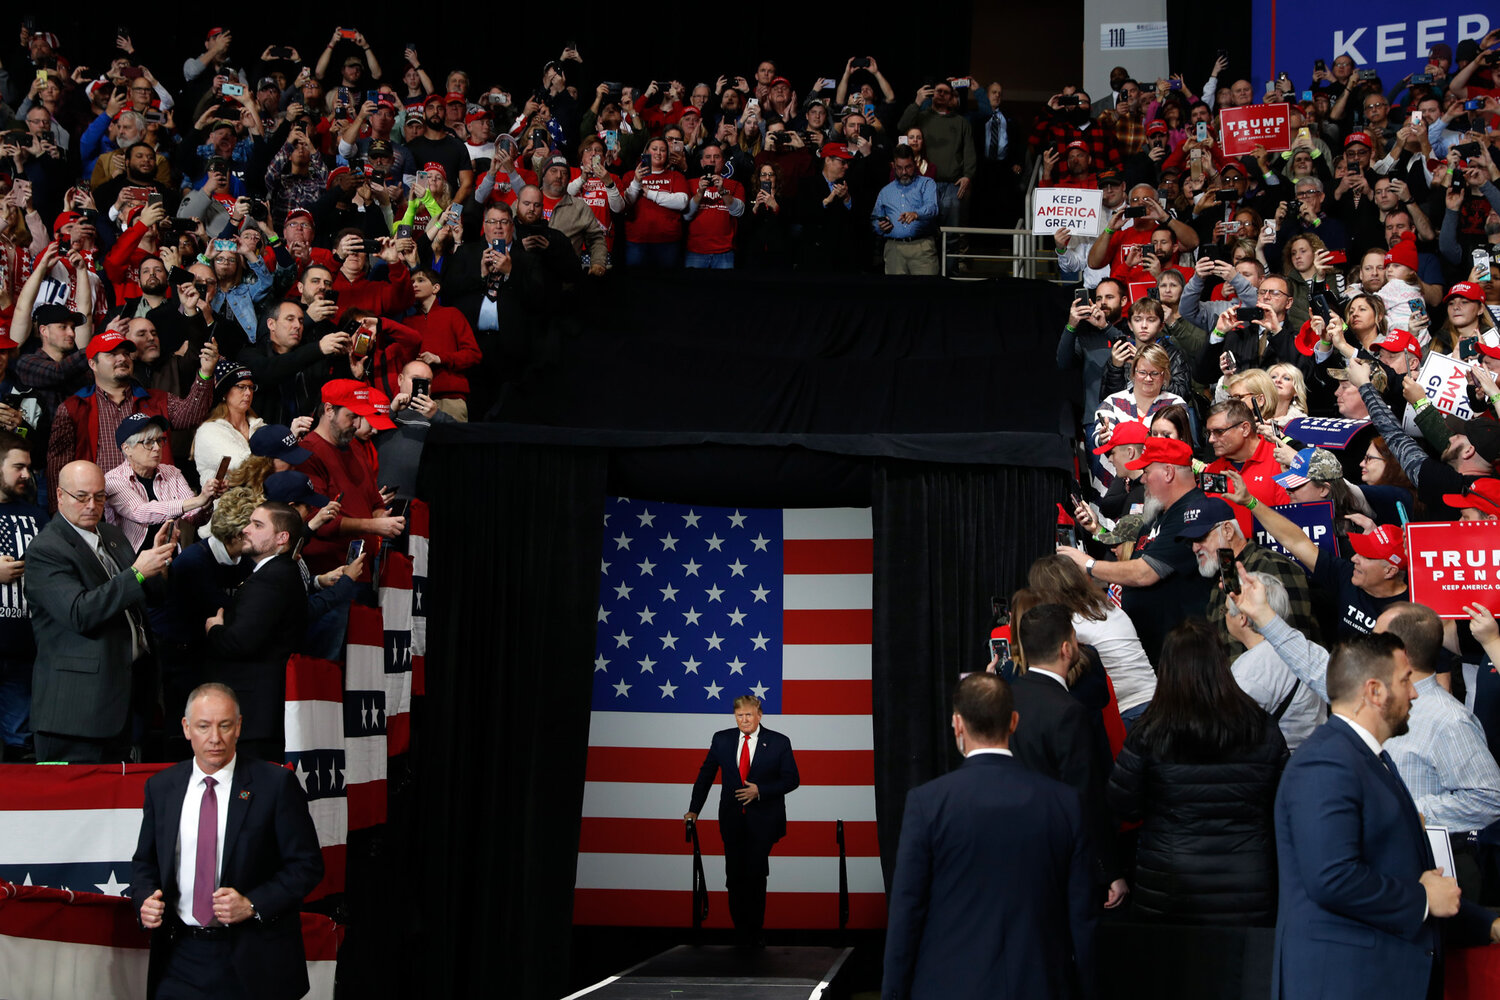  President Donald Trump arrives at a campaign rally in Toledo, Ohio, on Jan. 9, 2020. (AP Photo/Jacquelyn Martin) 